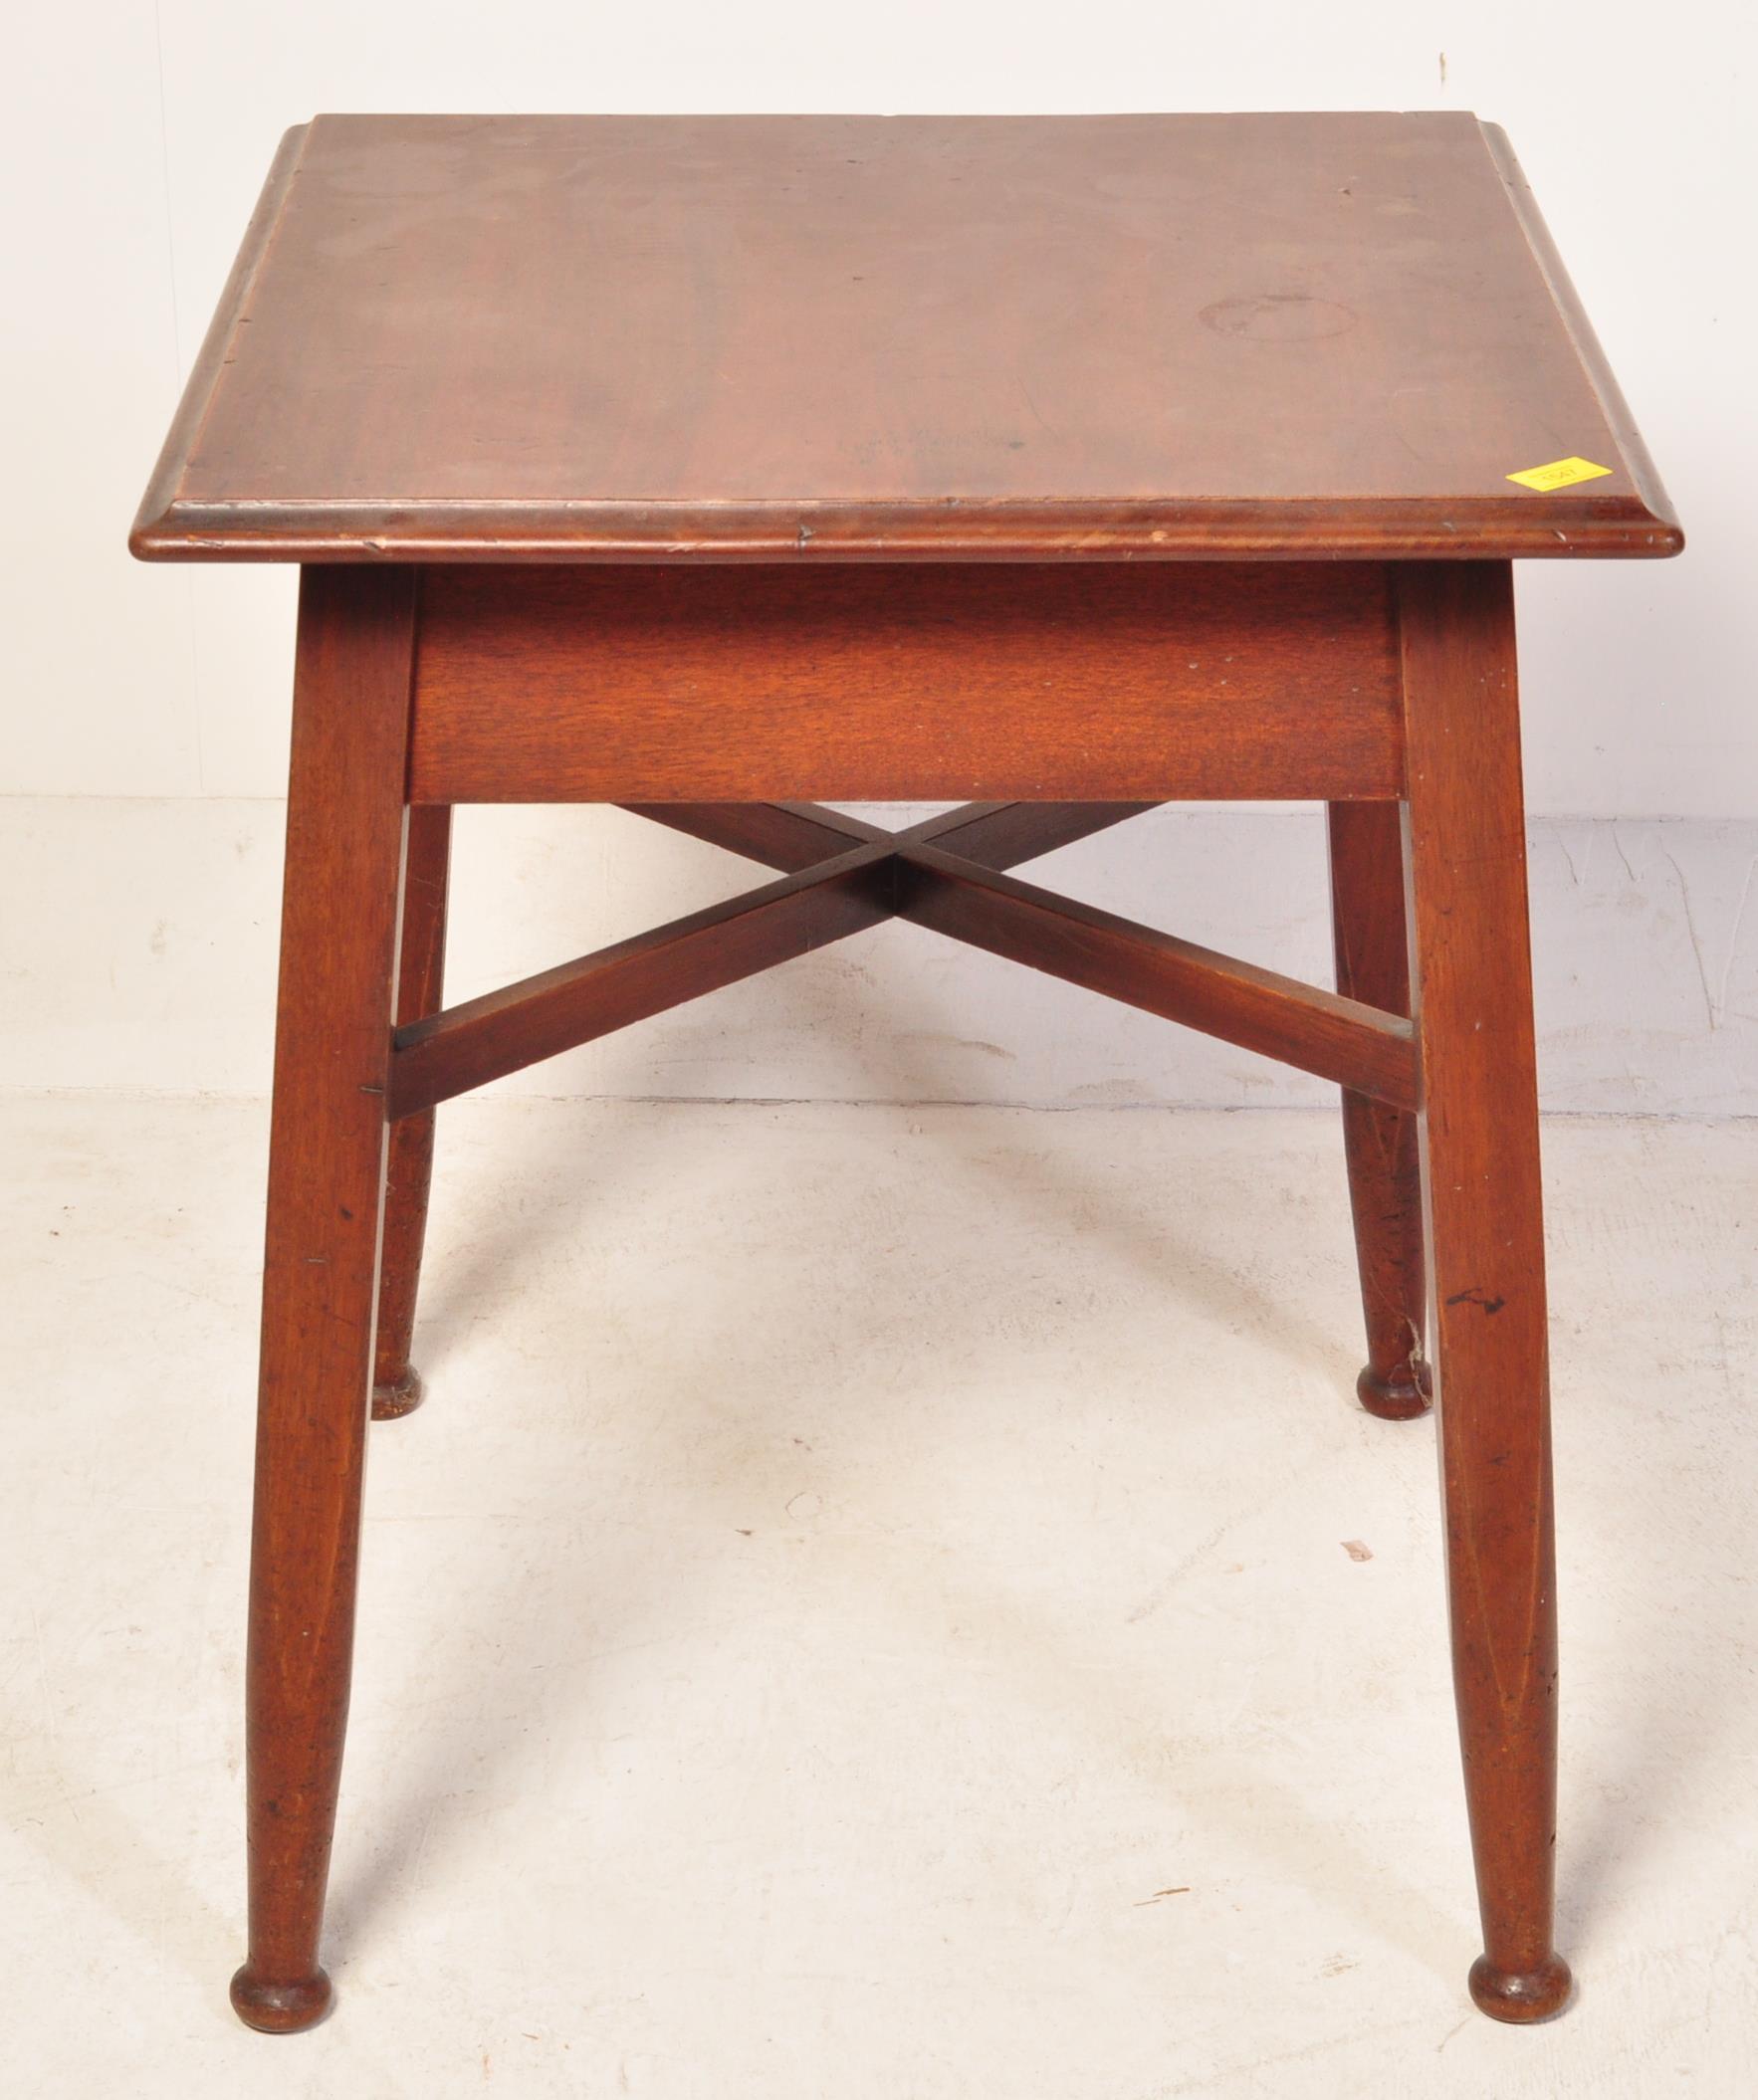 19TH CENTURY VICTORIAN ARTS AND CRAFTS OAK TAVERN TABLE - Image 2 of 5